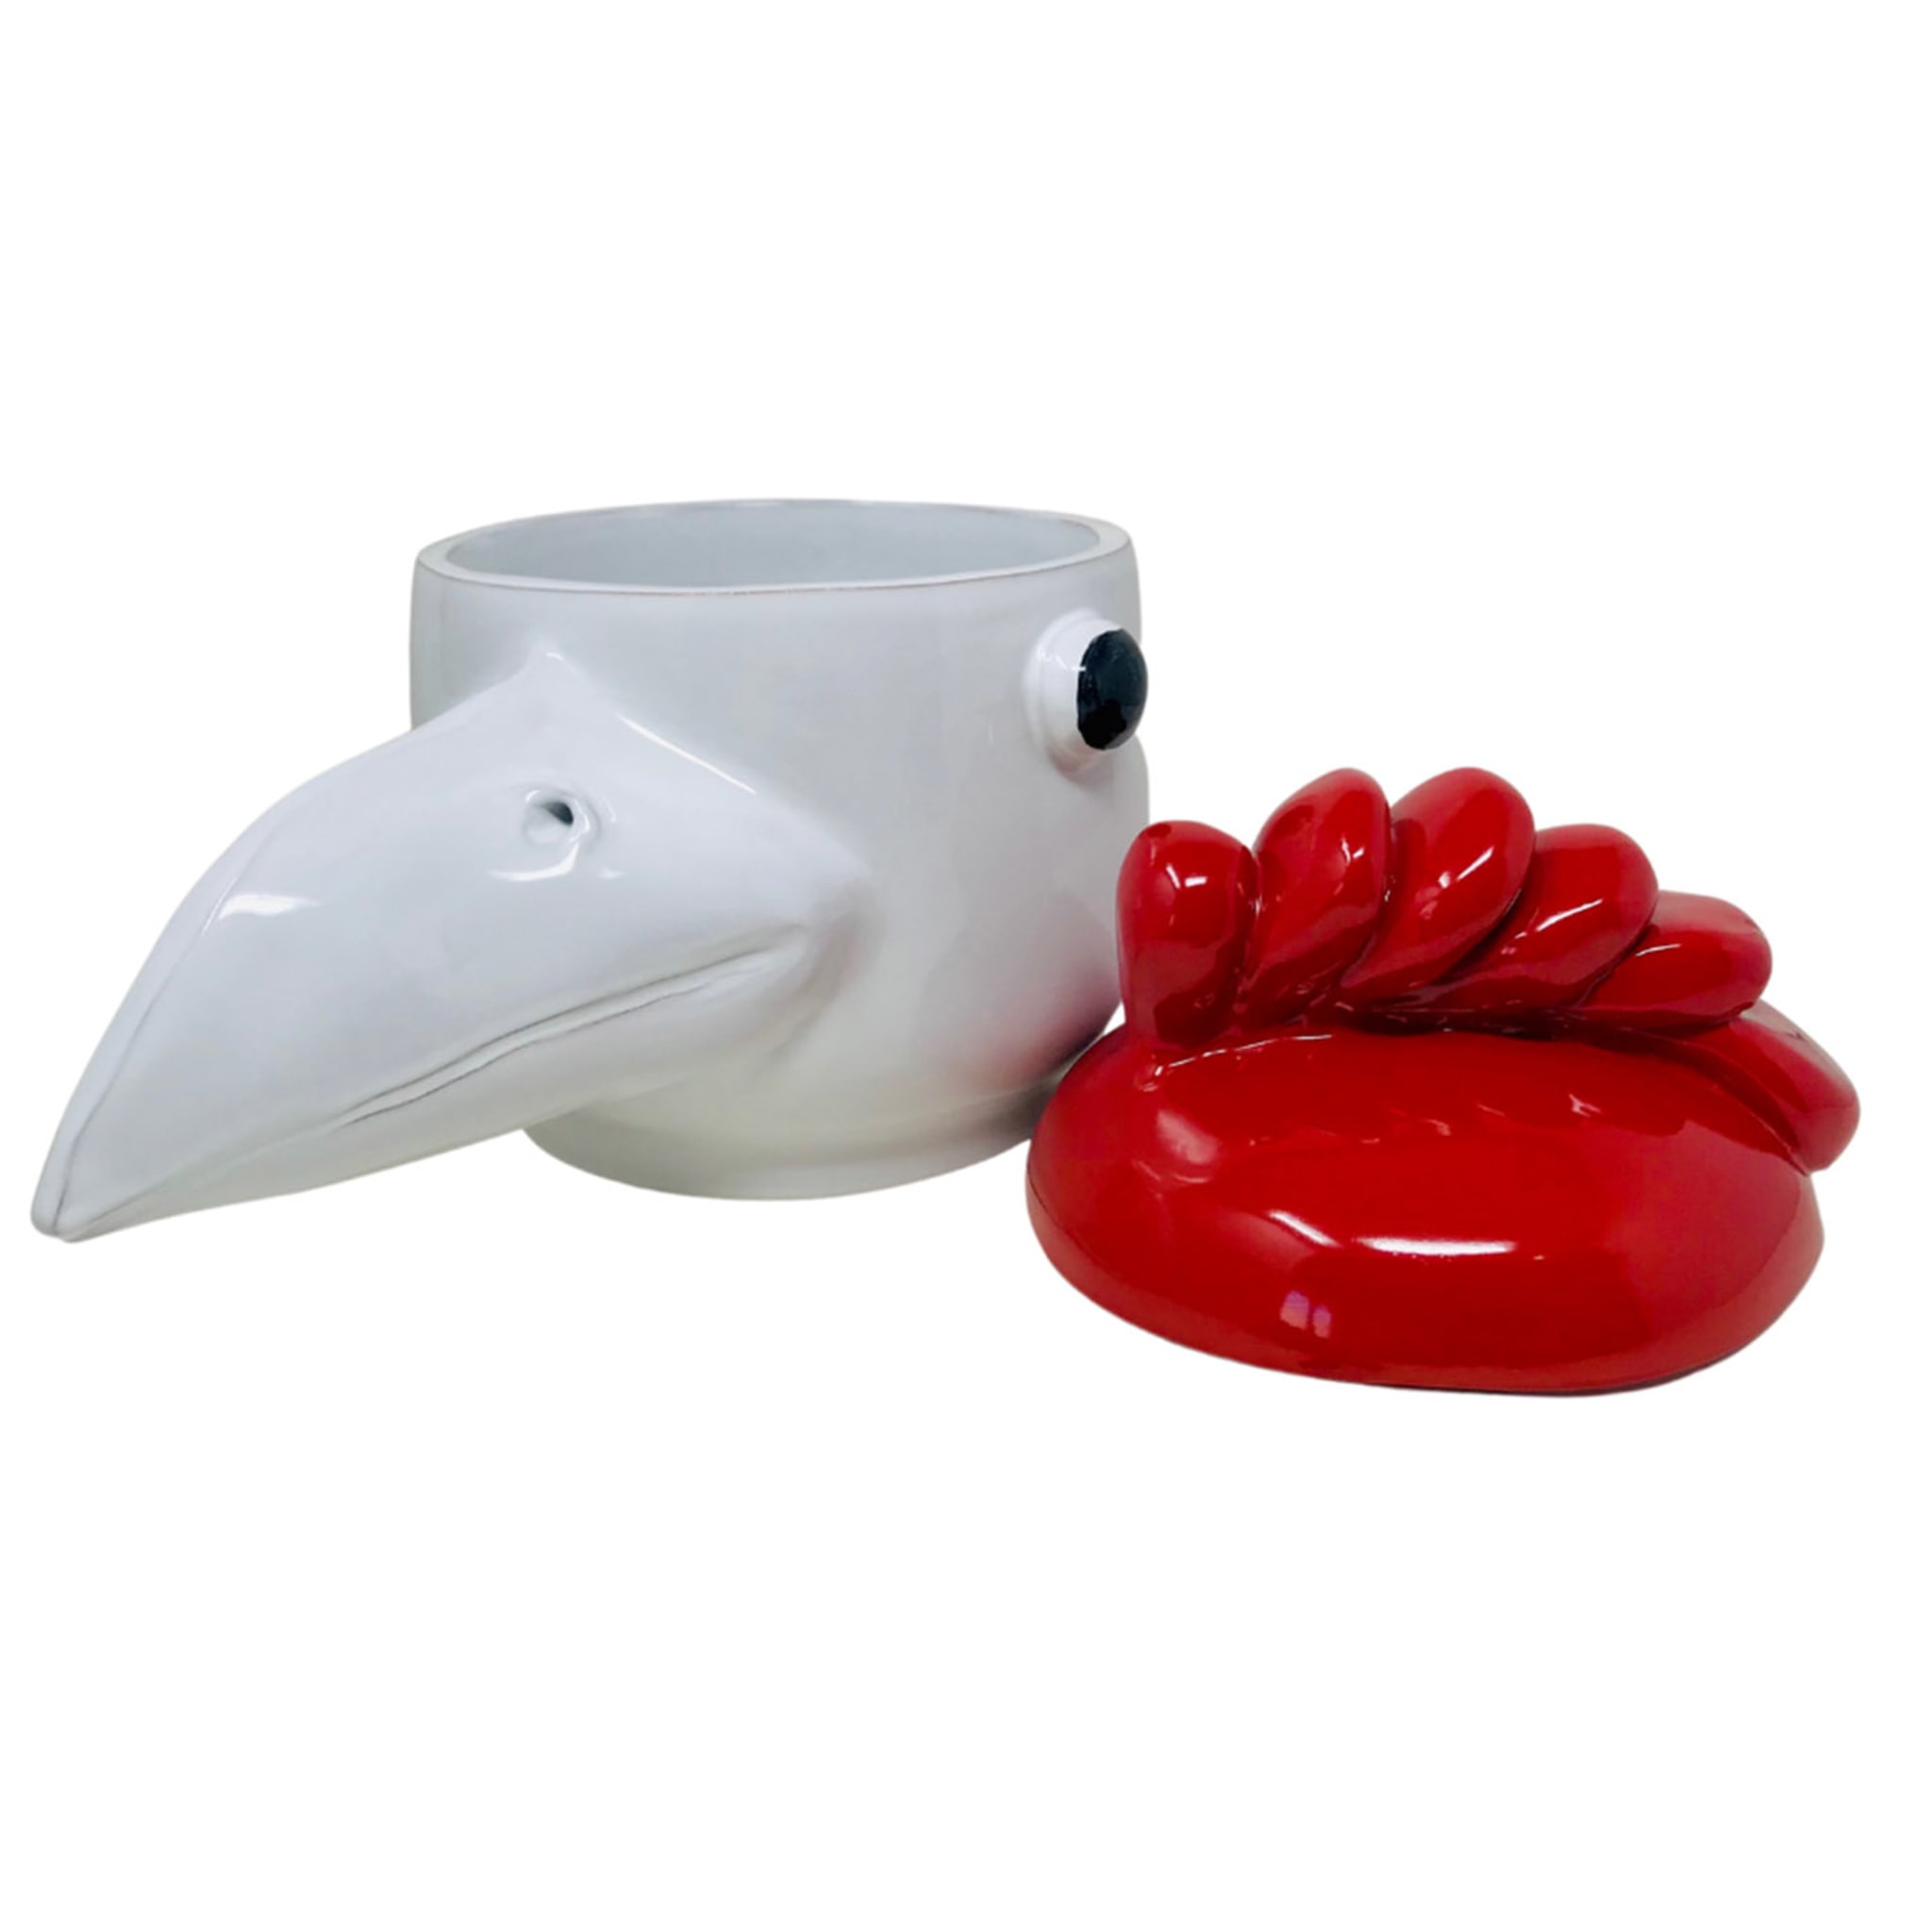 Large Red and White Bird Container with Lid - Alternative view 2